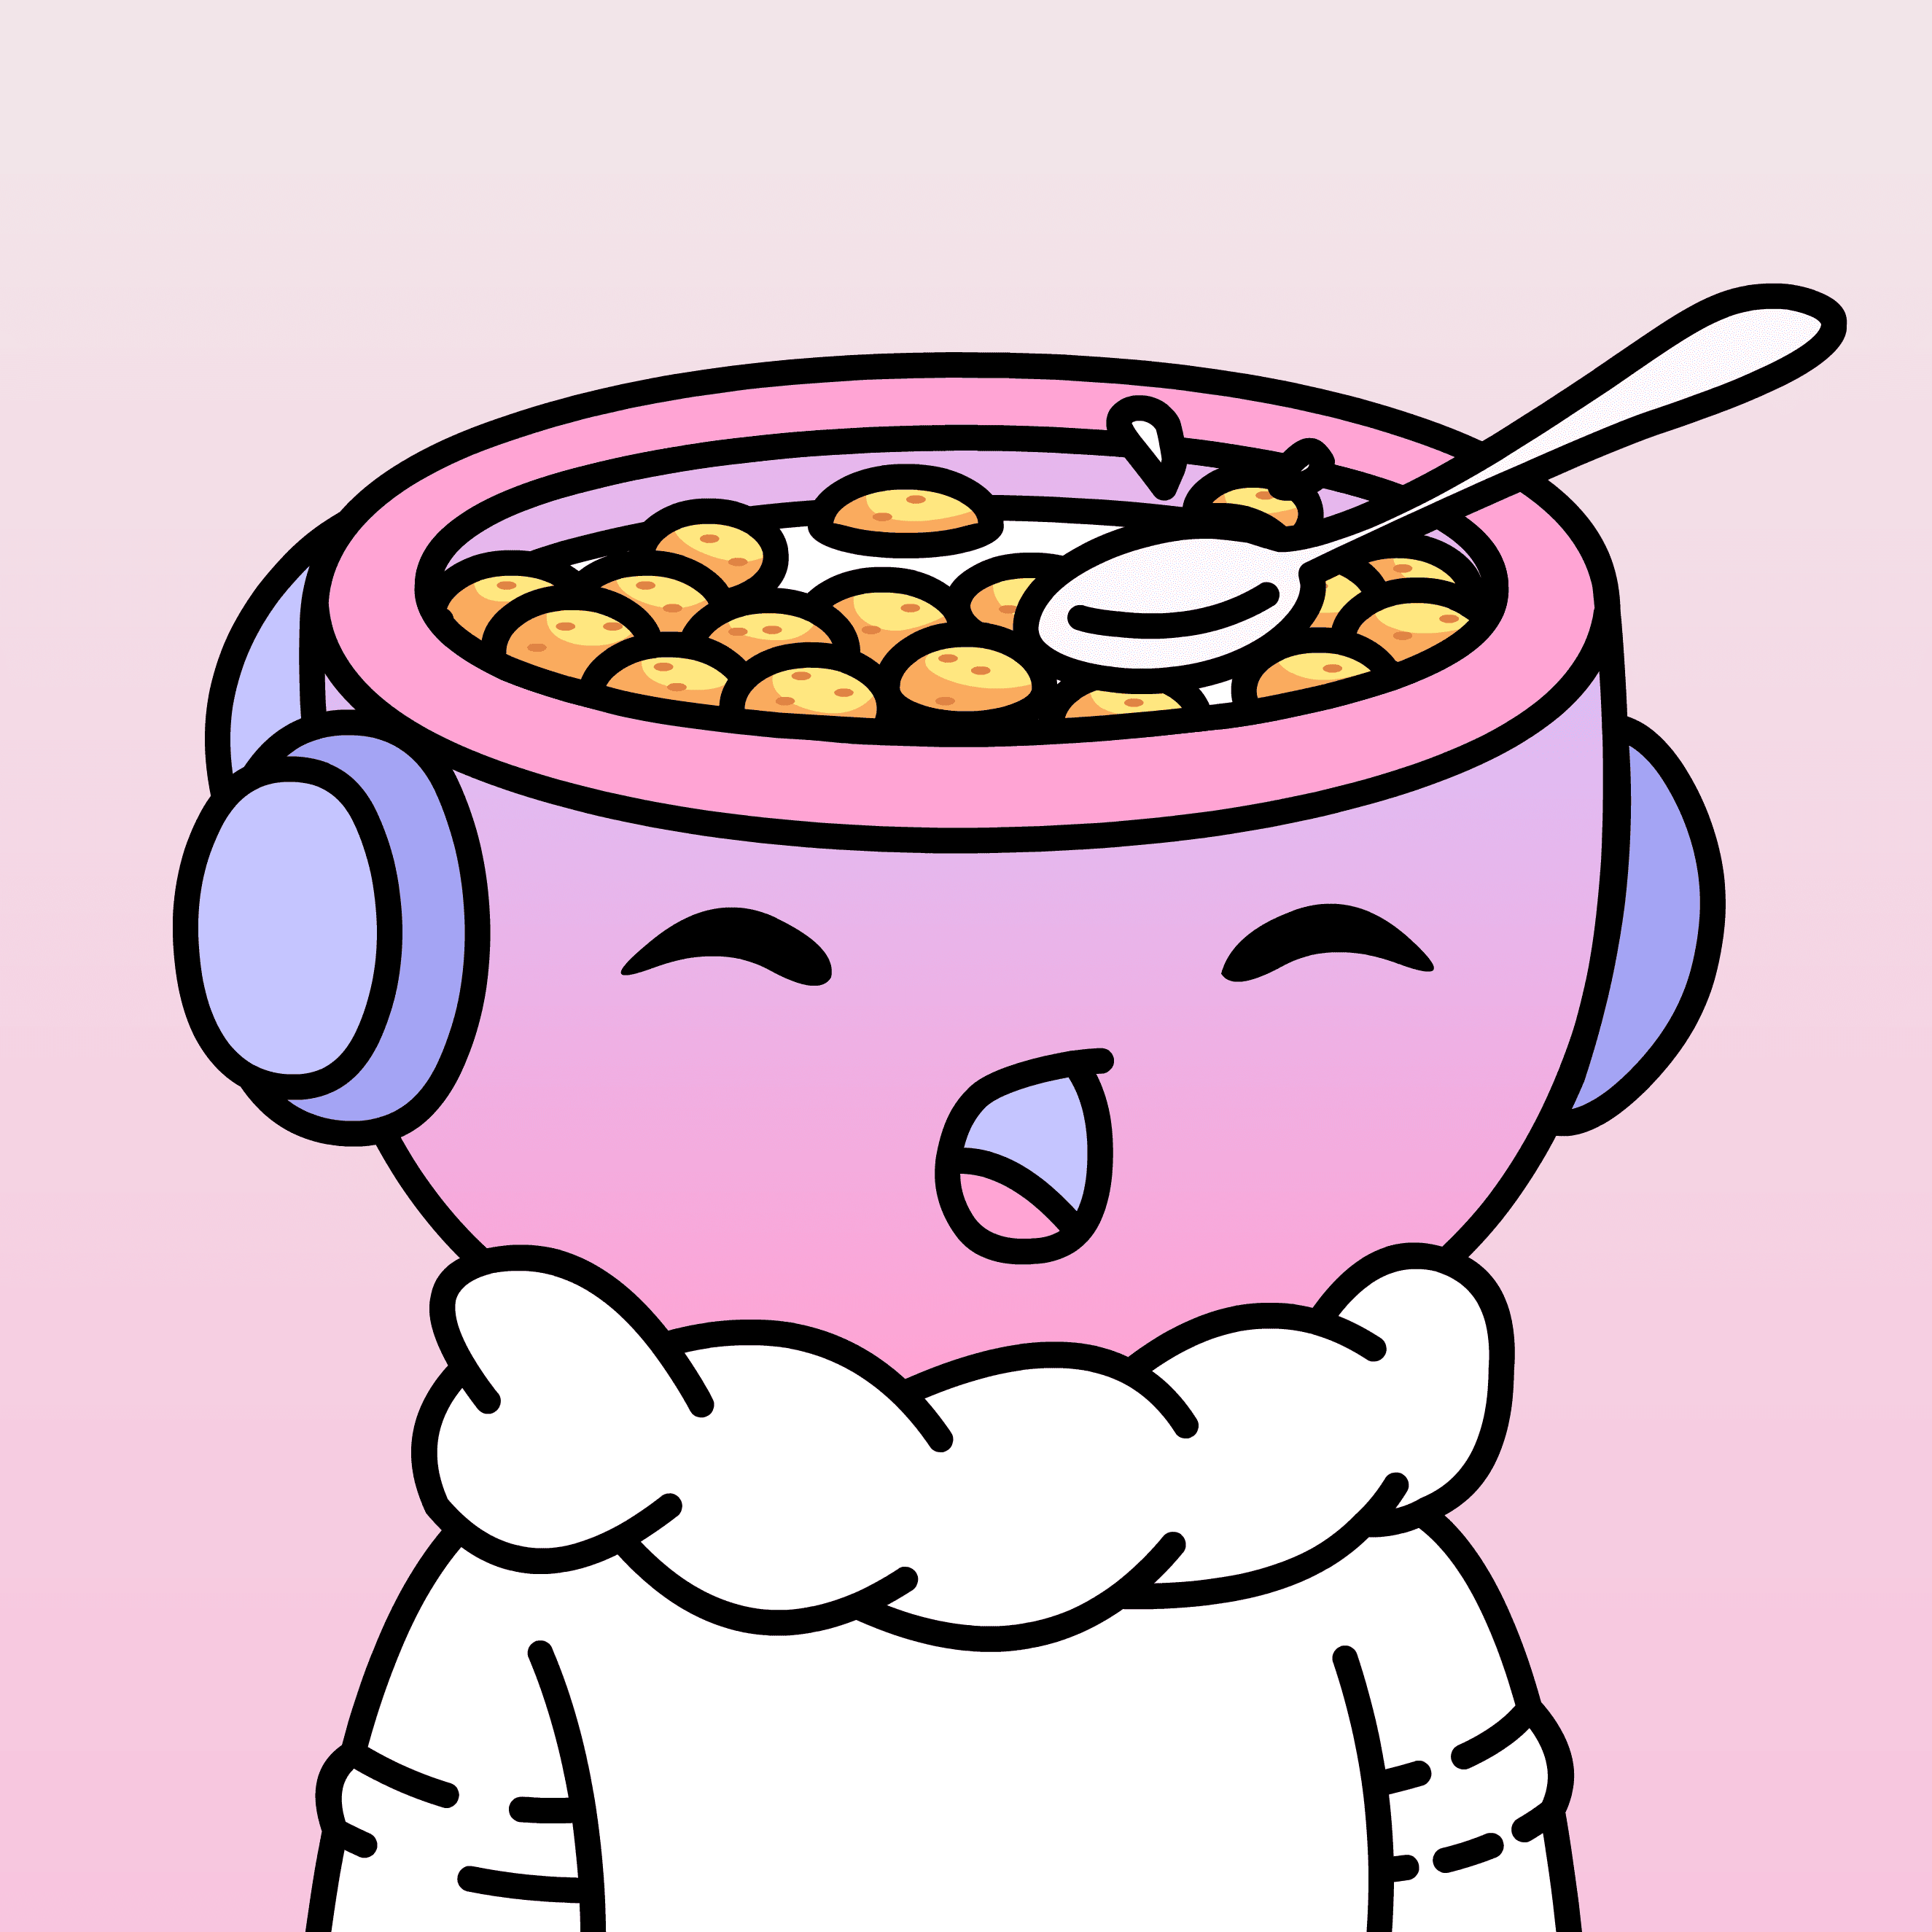 CEREAL #2132